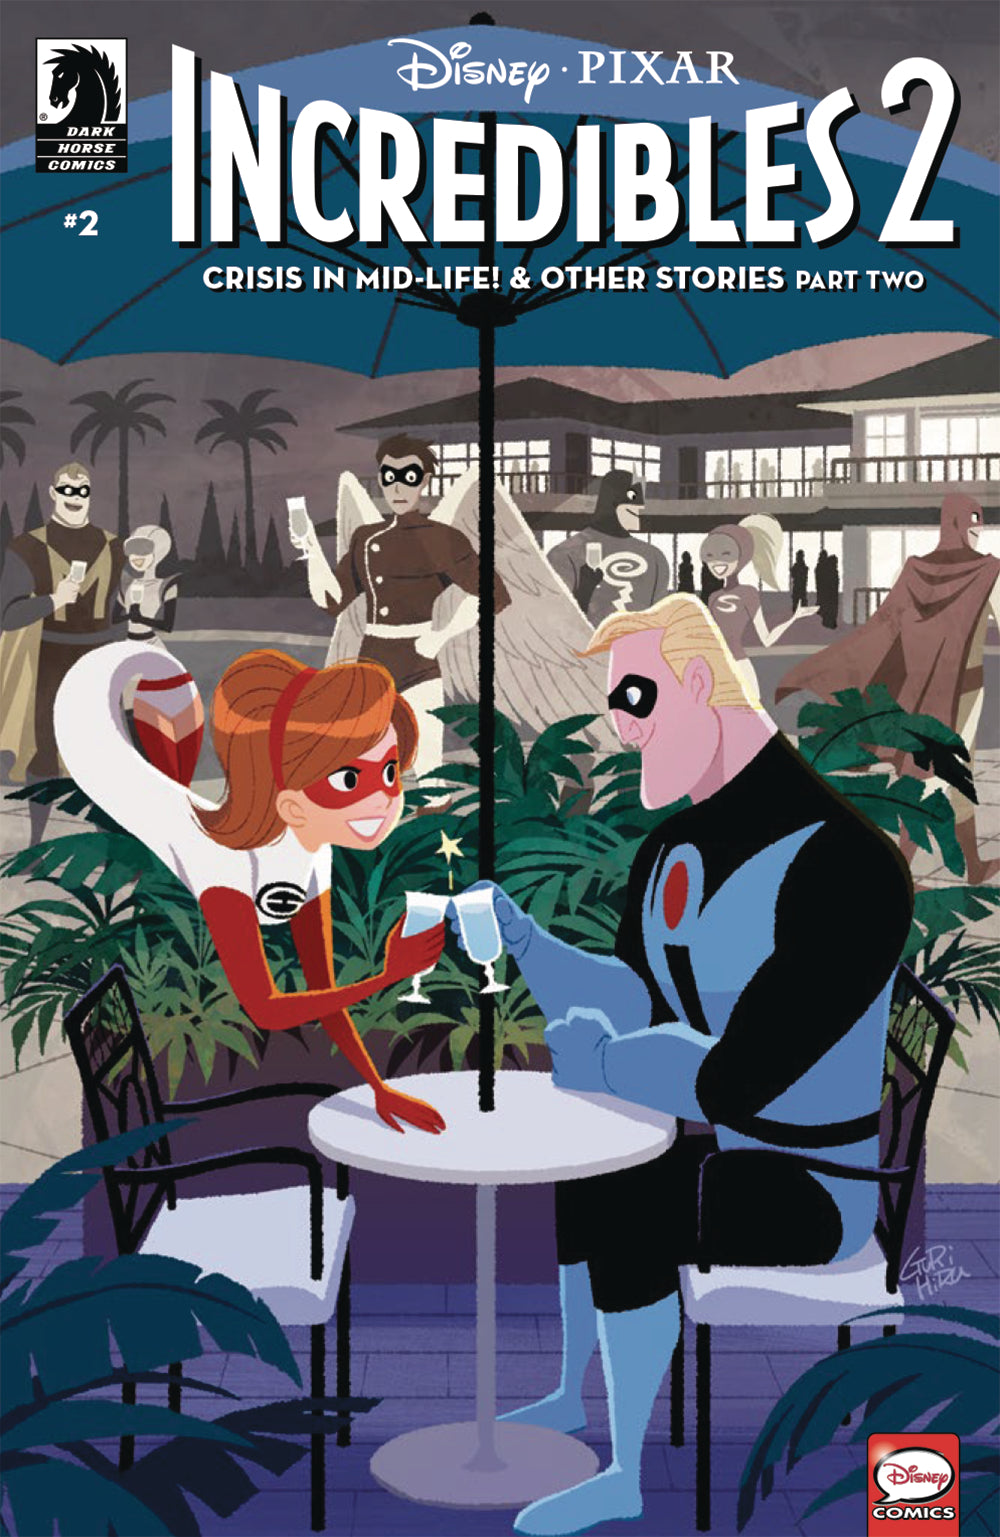 DISNEY PIXAR INCREDIBLES 2 #2 CRISIS MIDLIFE & OTHER STORIES COVER